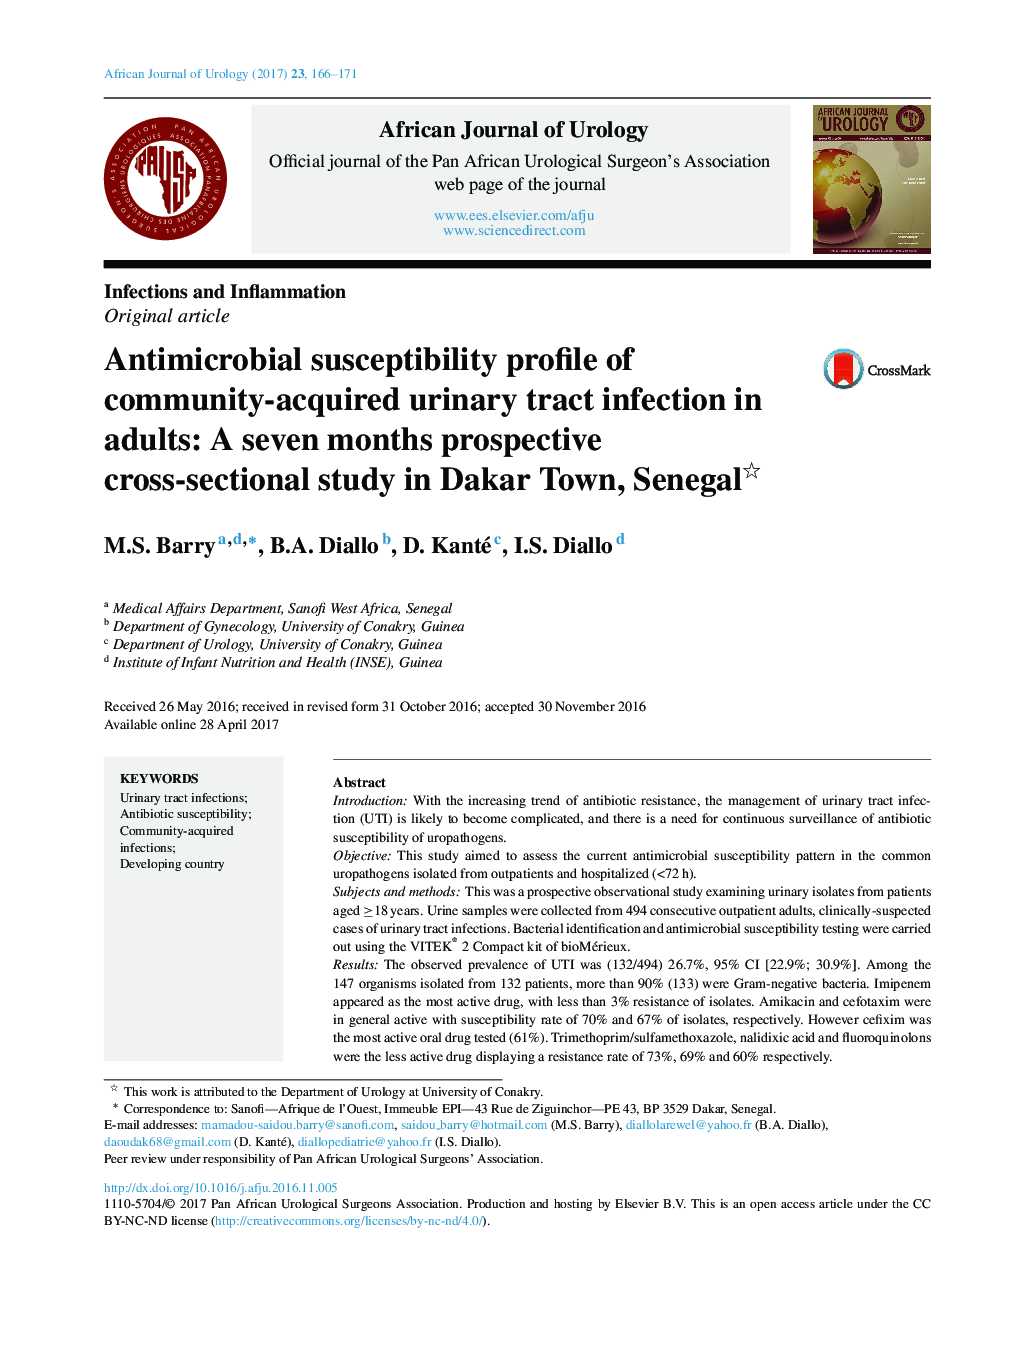 Infections and InflammationOriginal articleAntimicrobial susceptibility profile of community-acquired urinary tract infection in adults: A seven months prospective cross-sectional study in Dakar Town, Senegal